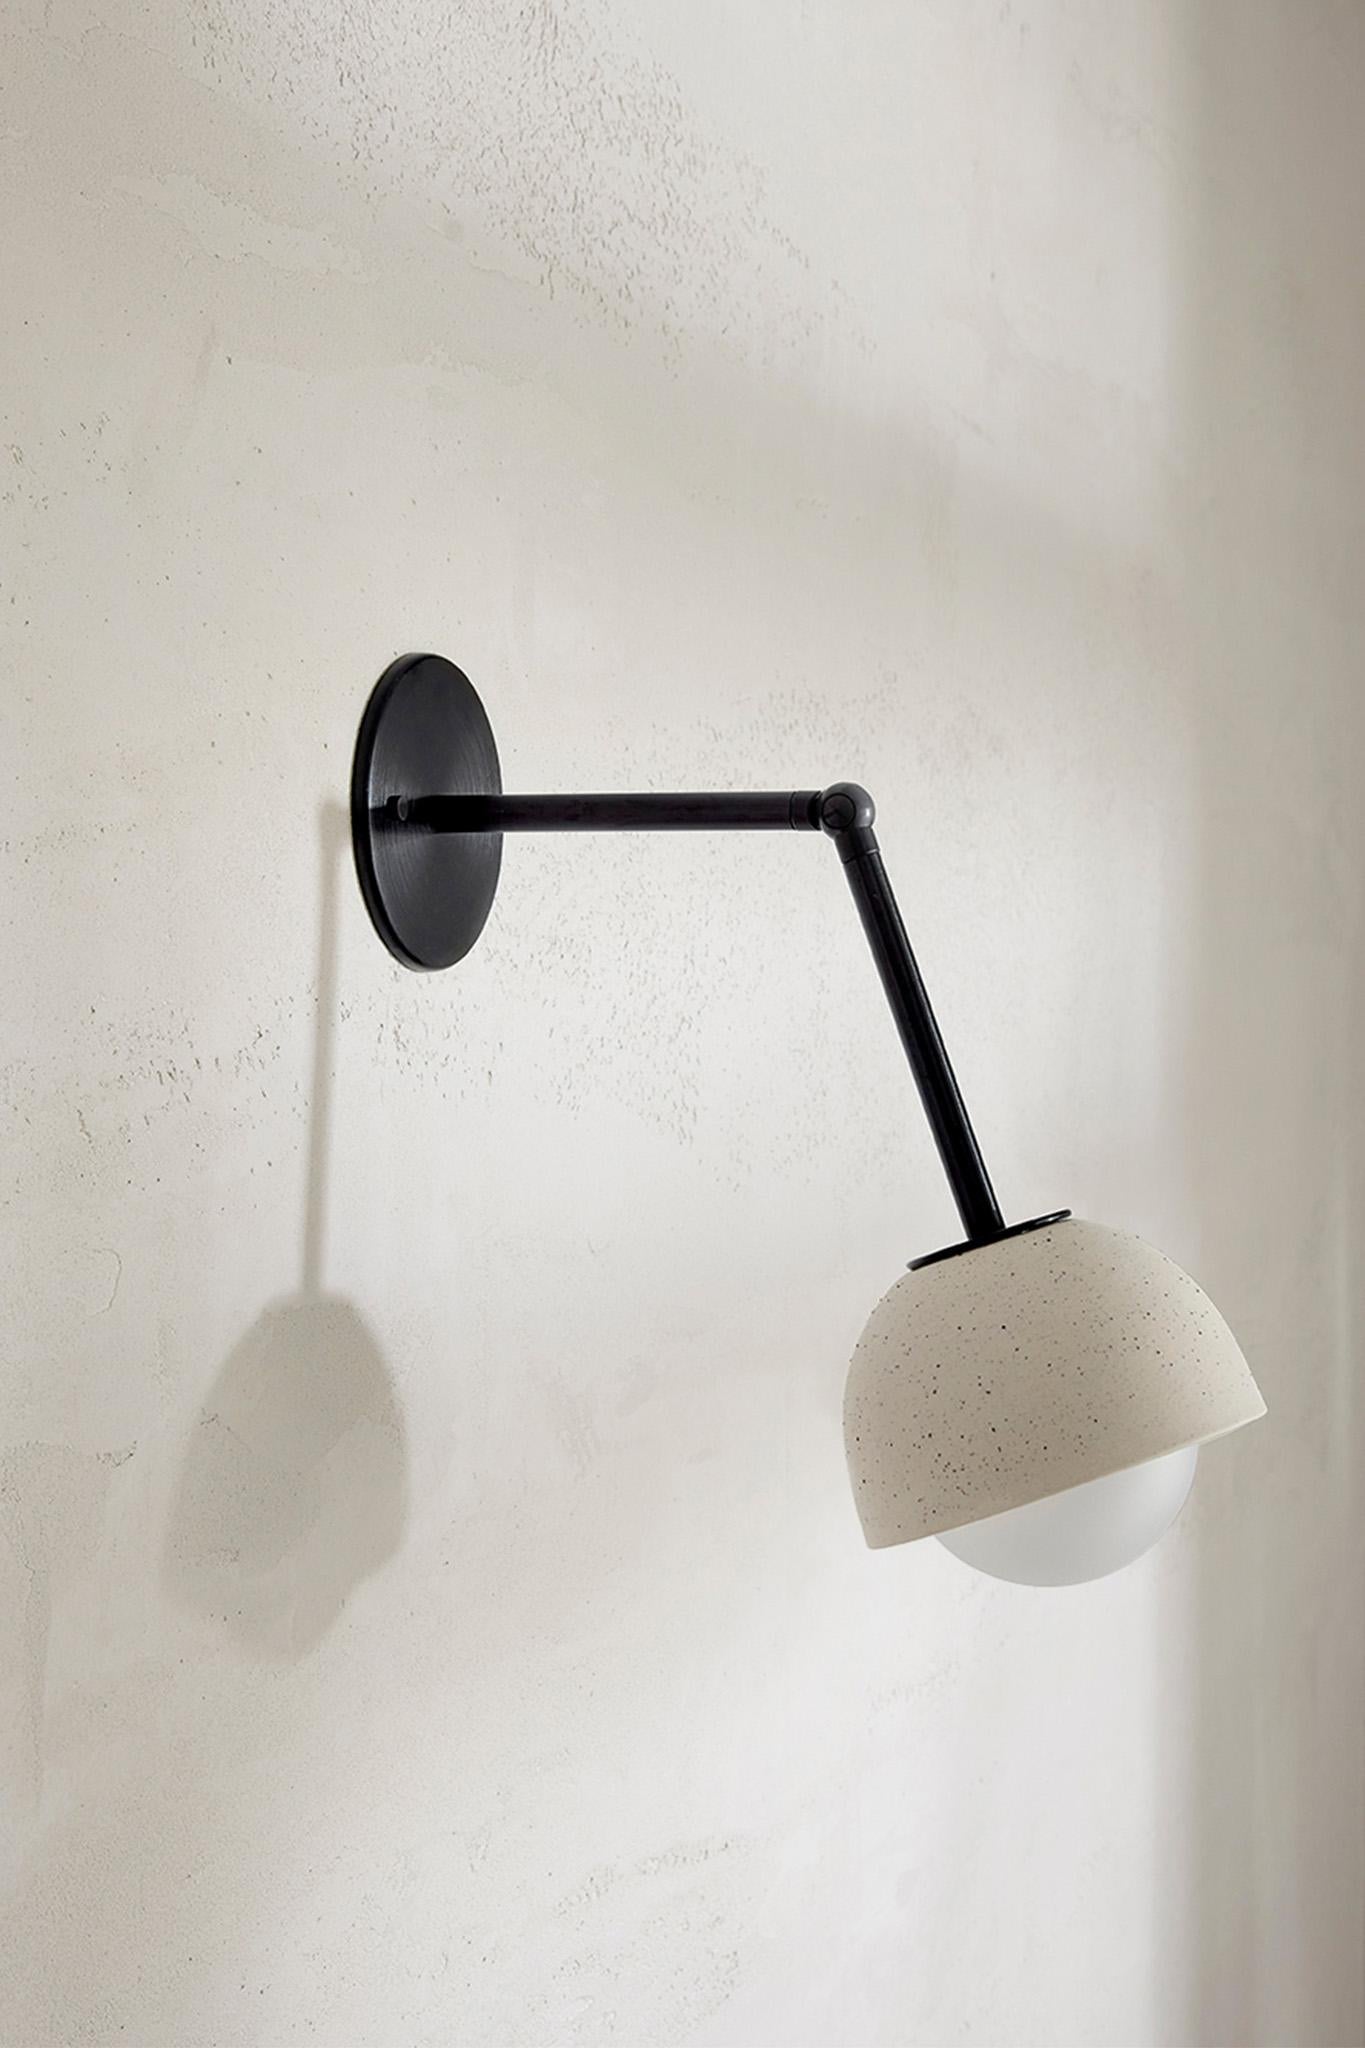 The Terra 0 Long Articulating Wall Light features a short or long articulating arm, the light is both directional and functional. The singular domed ceramic fitting creates a controlled light source. The Terra 0 Long Articulating Wall Light is